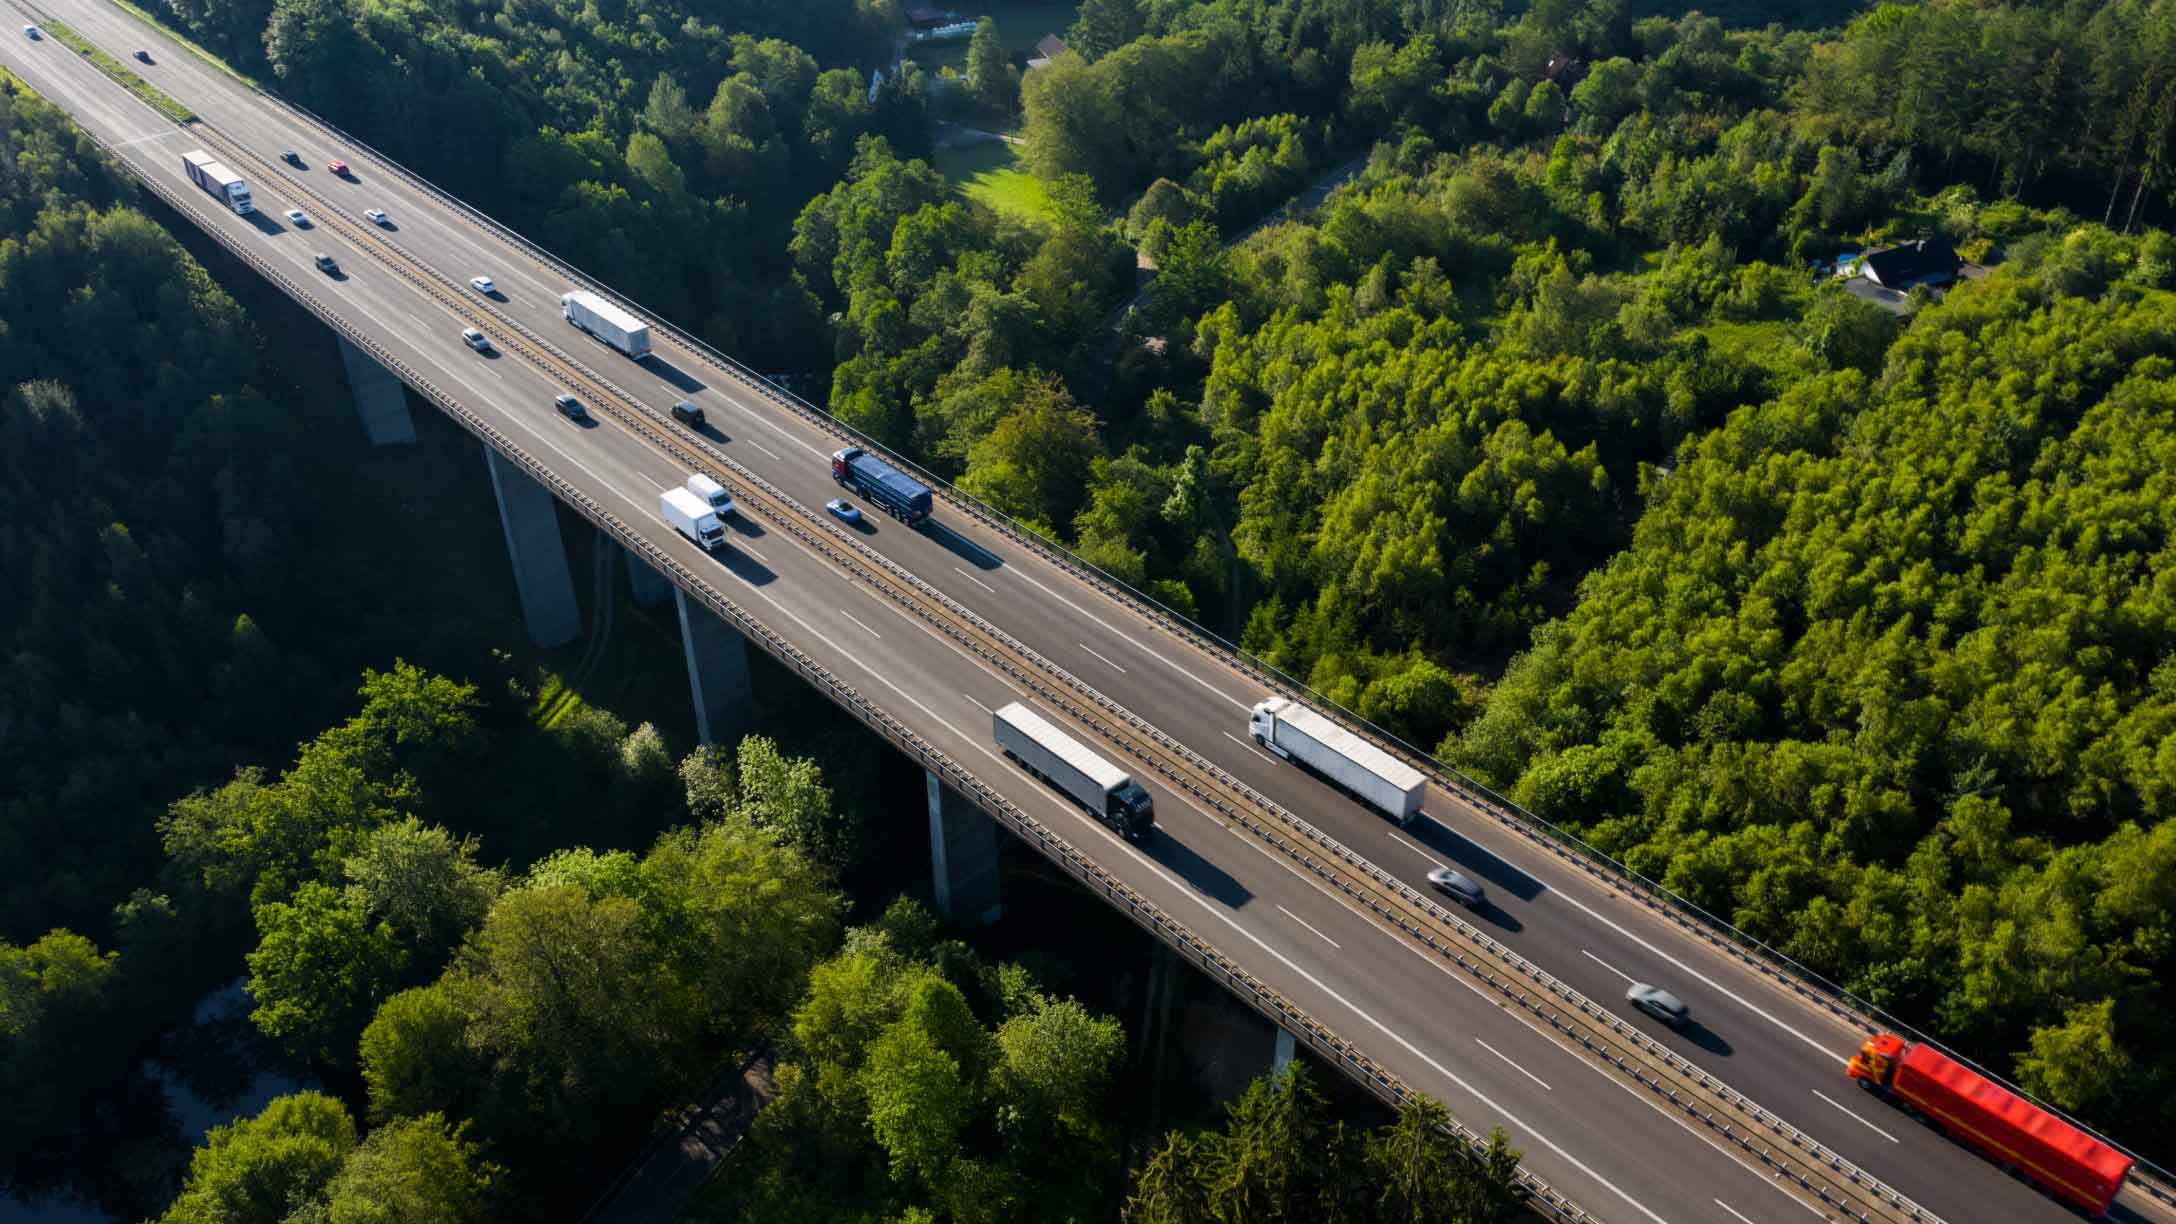 aerial shot of a highway with vehicles